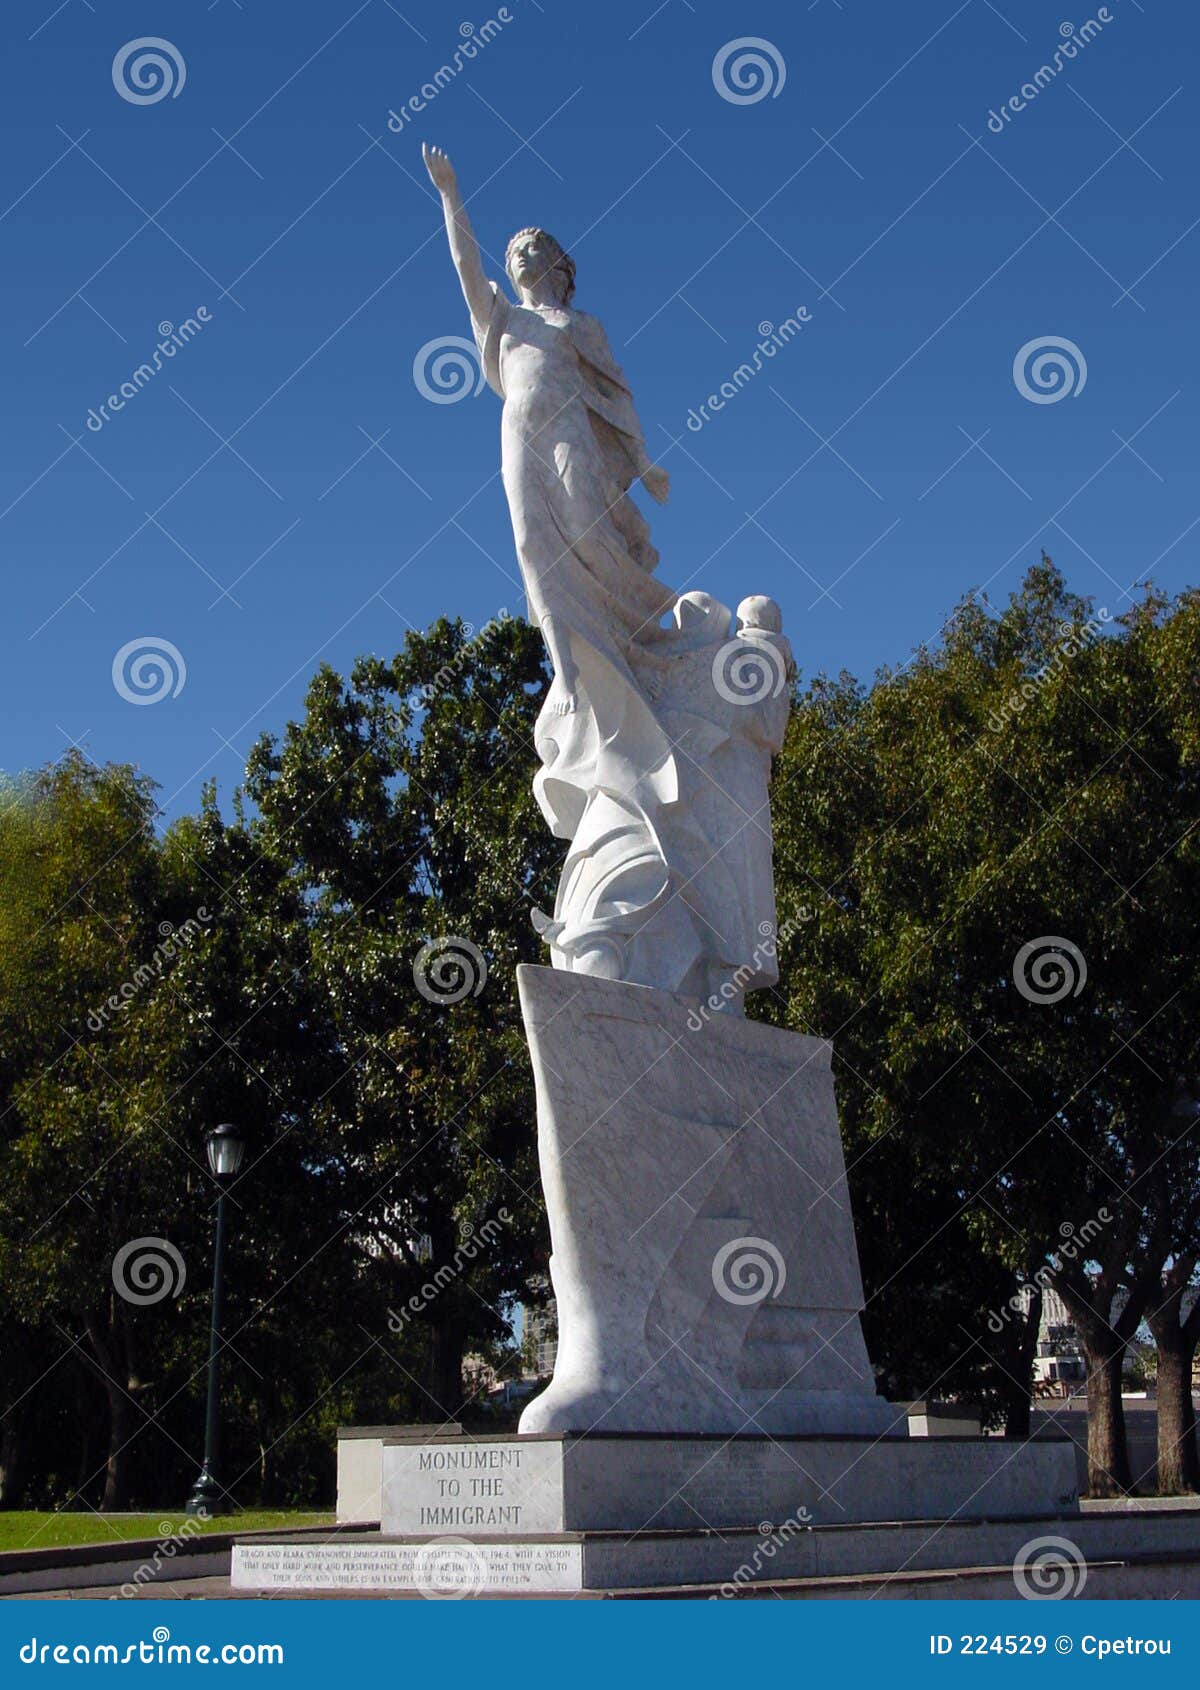 monument to the immigrant